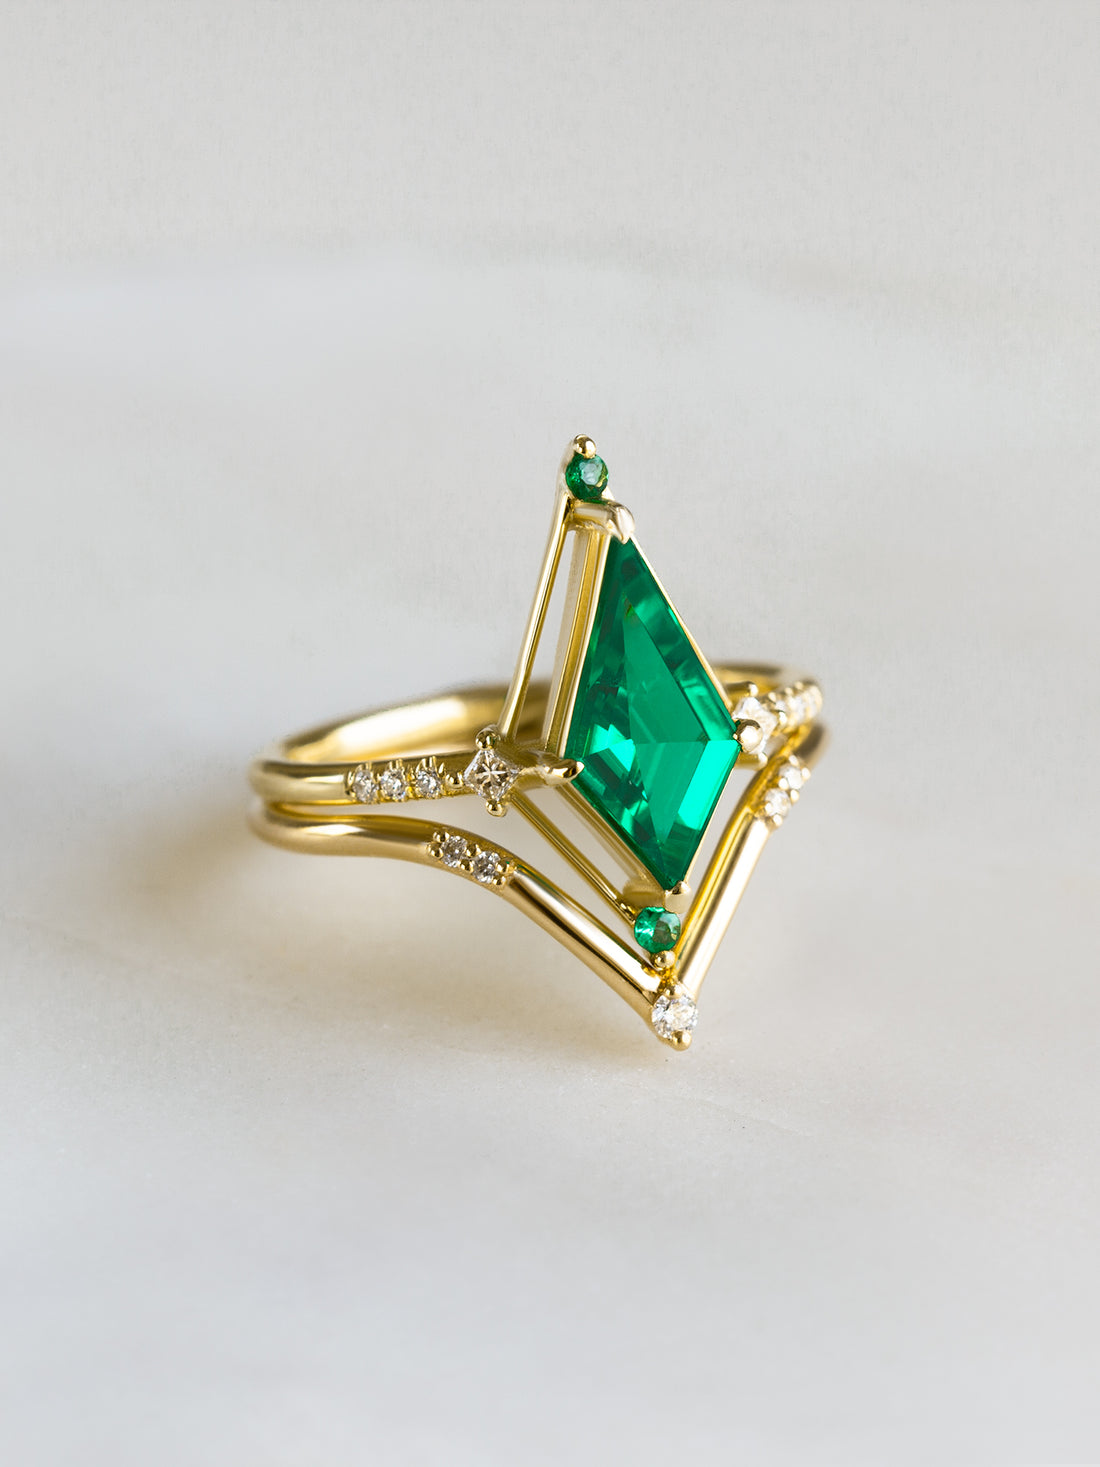 hiddenspace-engagement-ring-emerald-dawn-ring-proposal-unique-finejewelry9